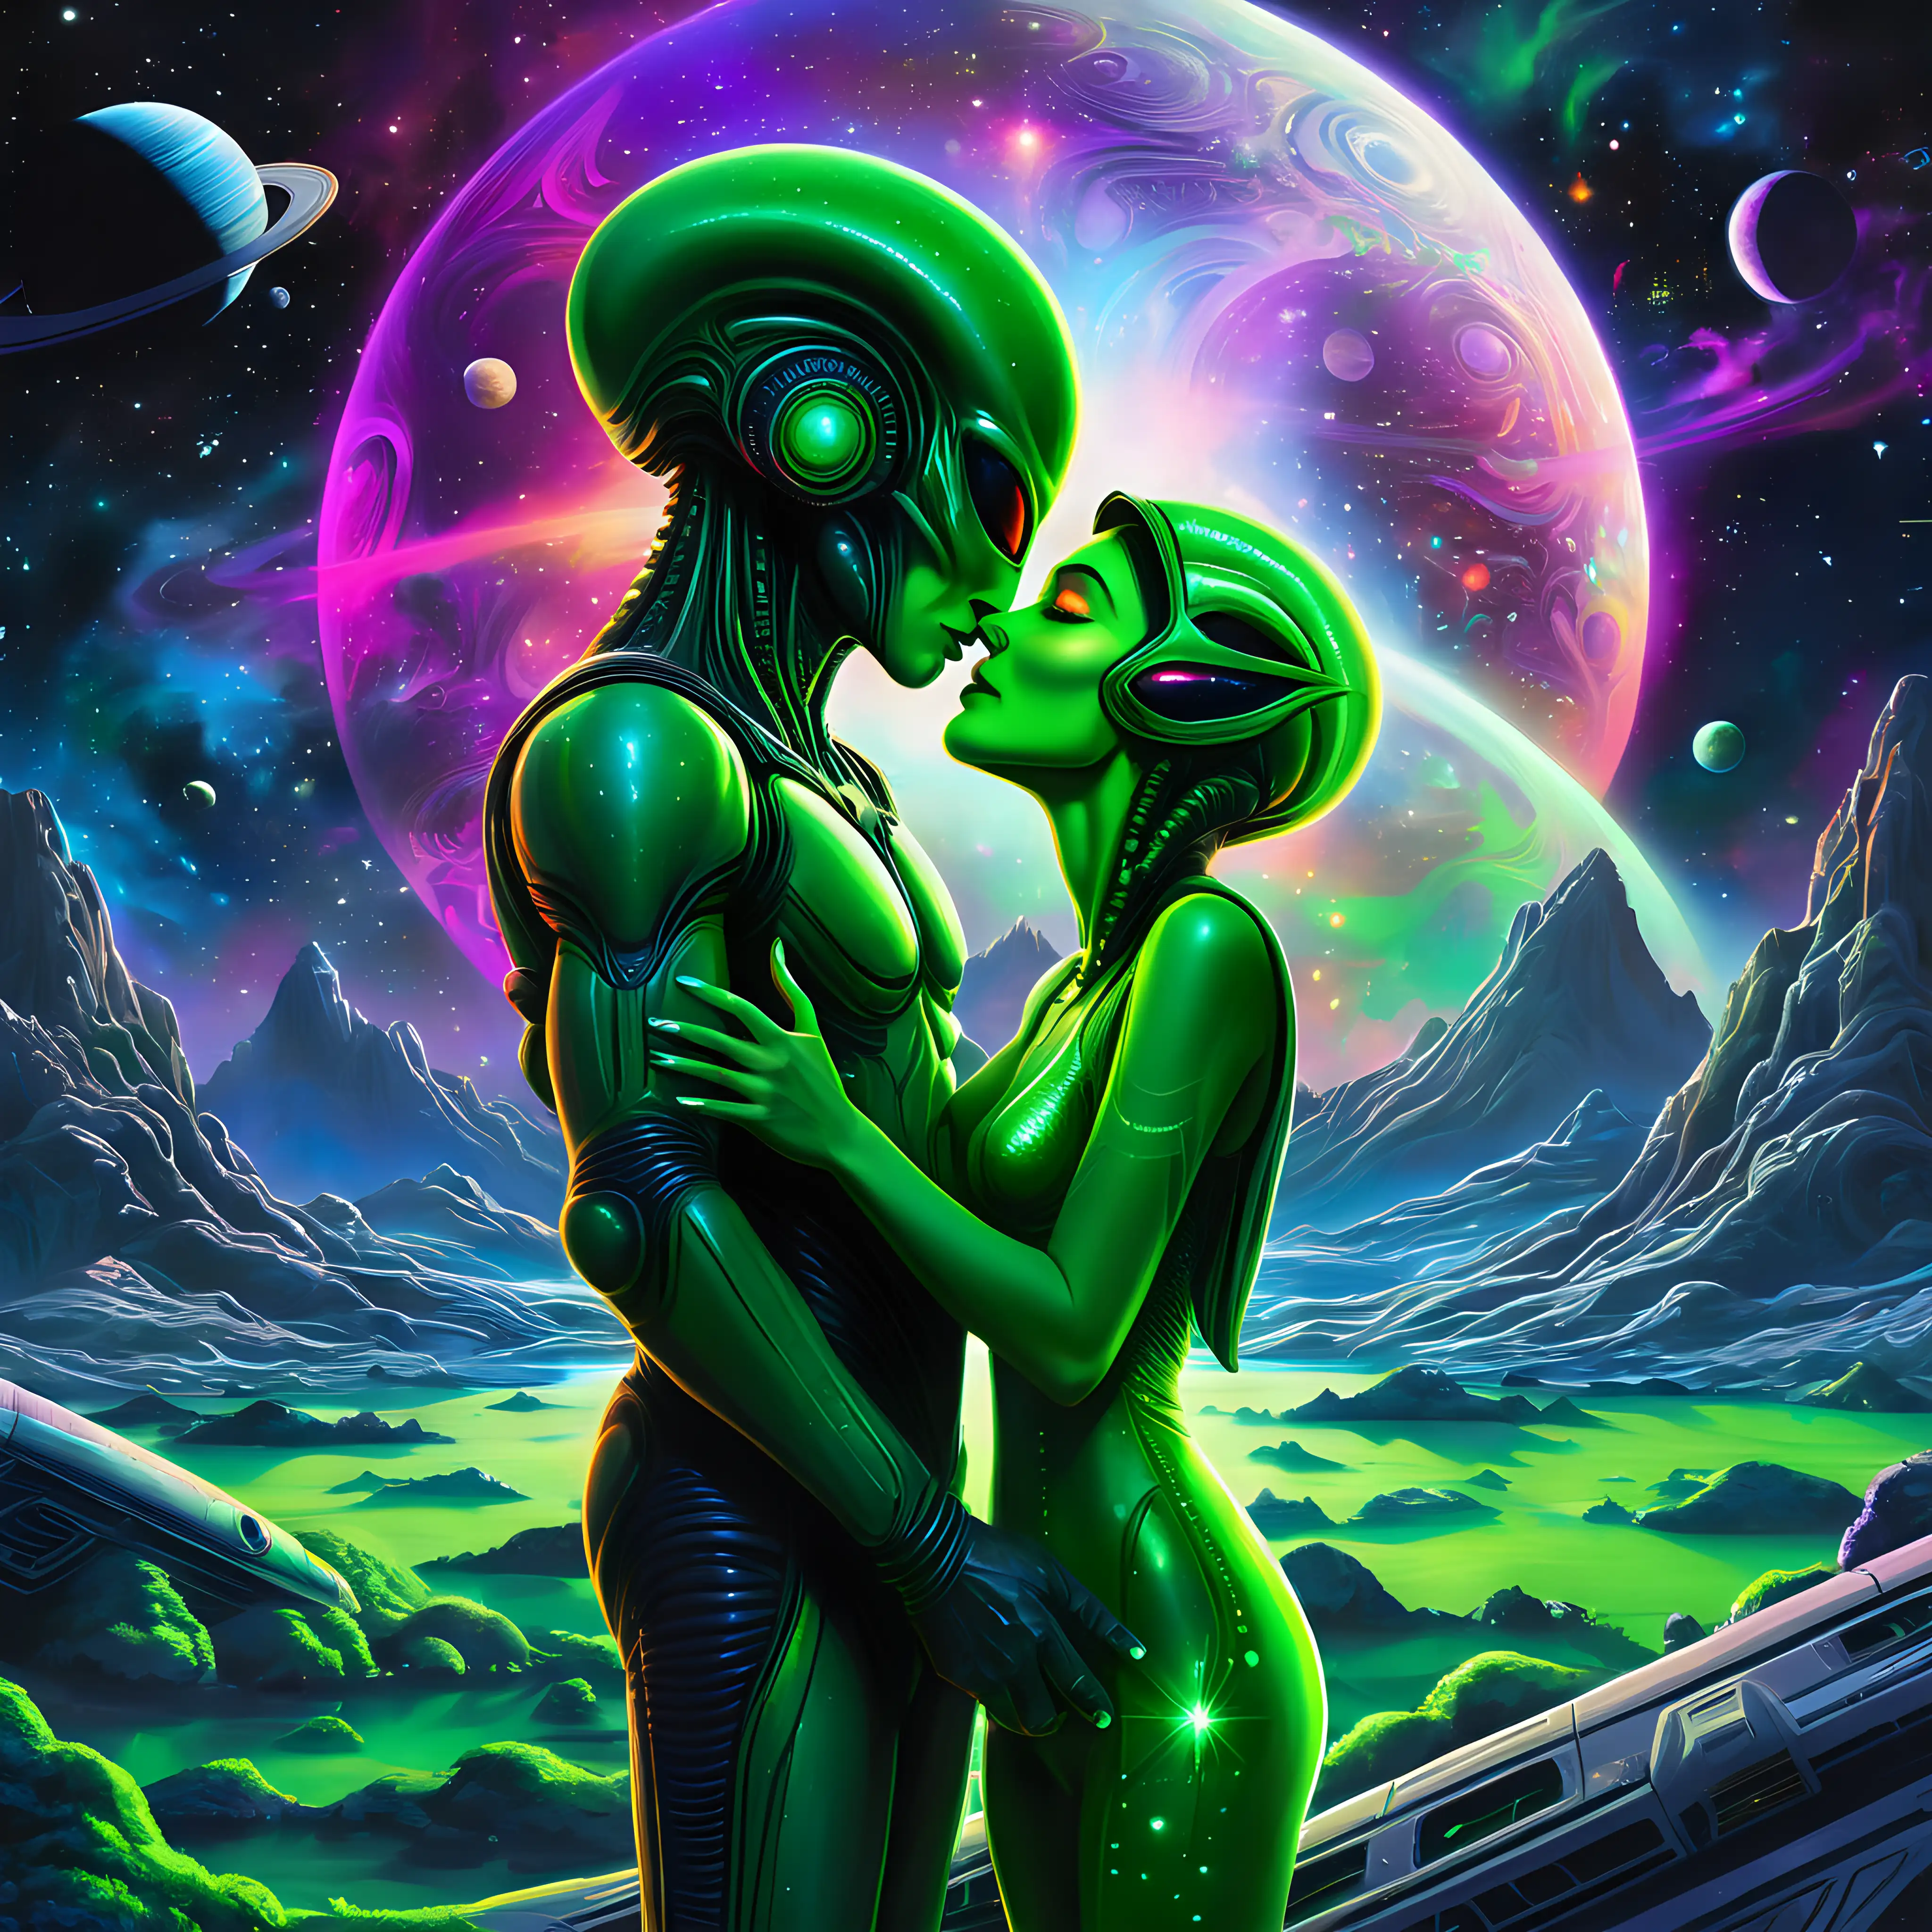 Alien graffiti masterpiece, lunar landscape backdrop, extraterrestrial couple, female and male aliens, extraterrestrial love, holding hands, hugging kissing, and smoking joints. Cosmic motifs, vibrant neon green hues, intelligently blended, richly saturated tones, star-studded sky, celestial bodies, nebulas, and spacecraft, cosmos-driven, intricate graffiti technique, futuristic design, digital artwork, high-resolution output, dynamic arrangement, urban street art feel, luminous highlights, intergalactic ambiance.